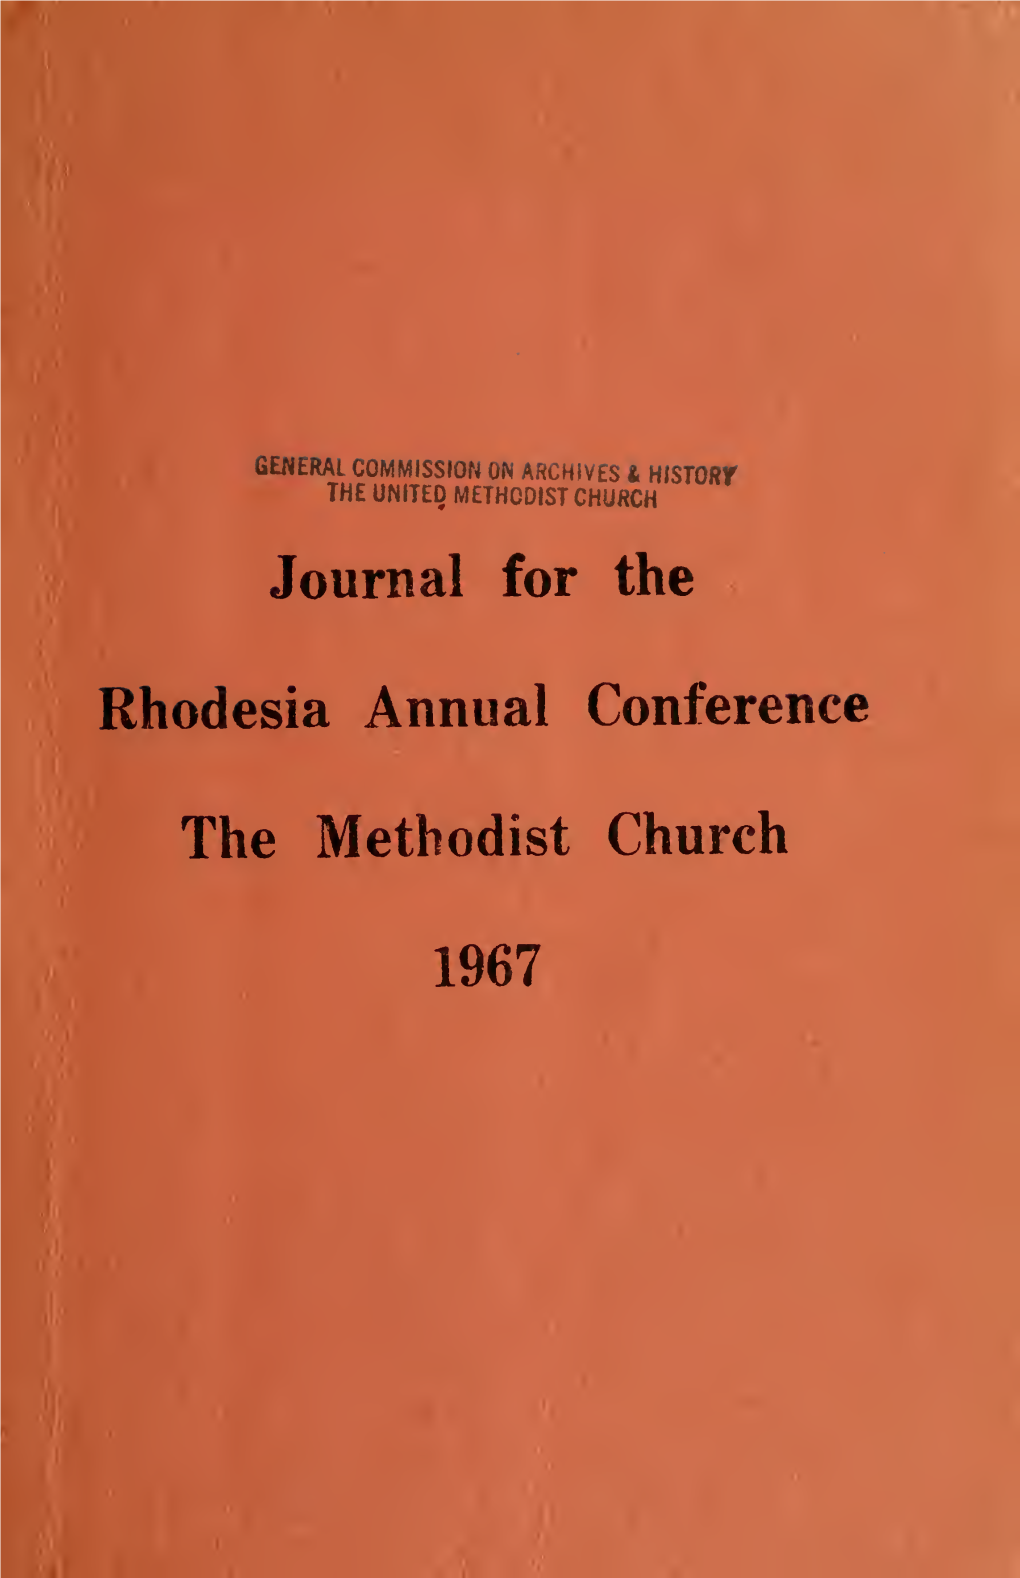 Official Journal of the Twenty-Ninth Session of the Rhodesia Annual